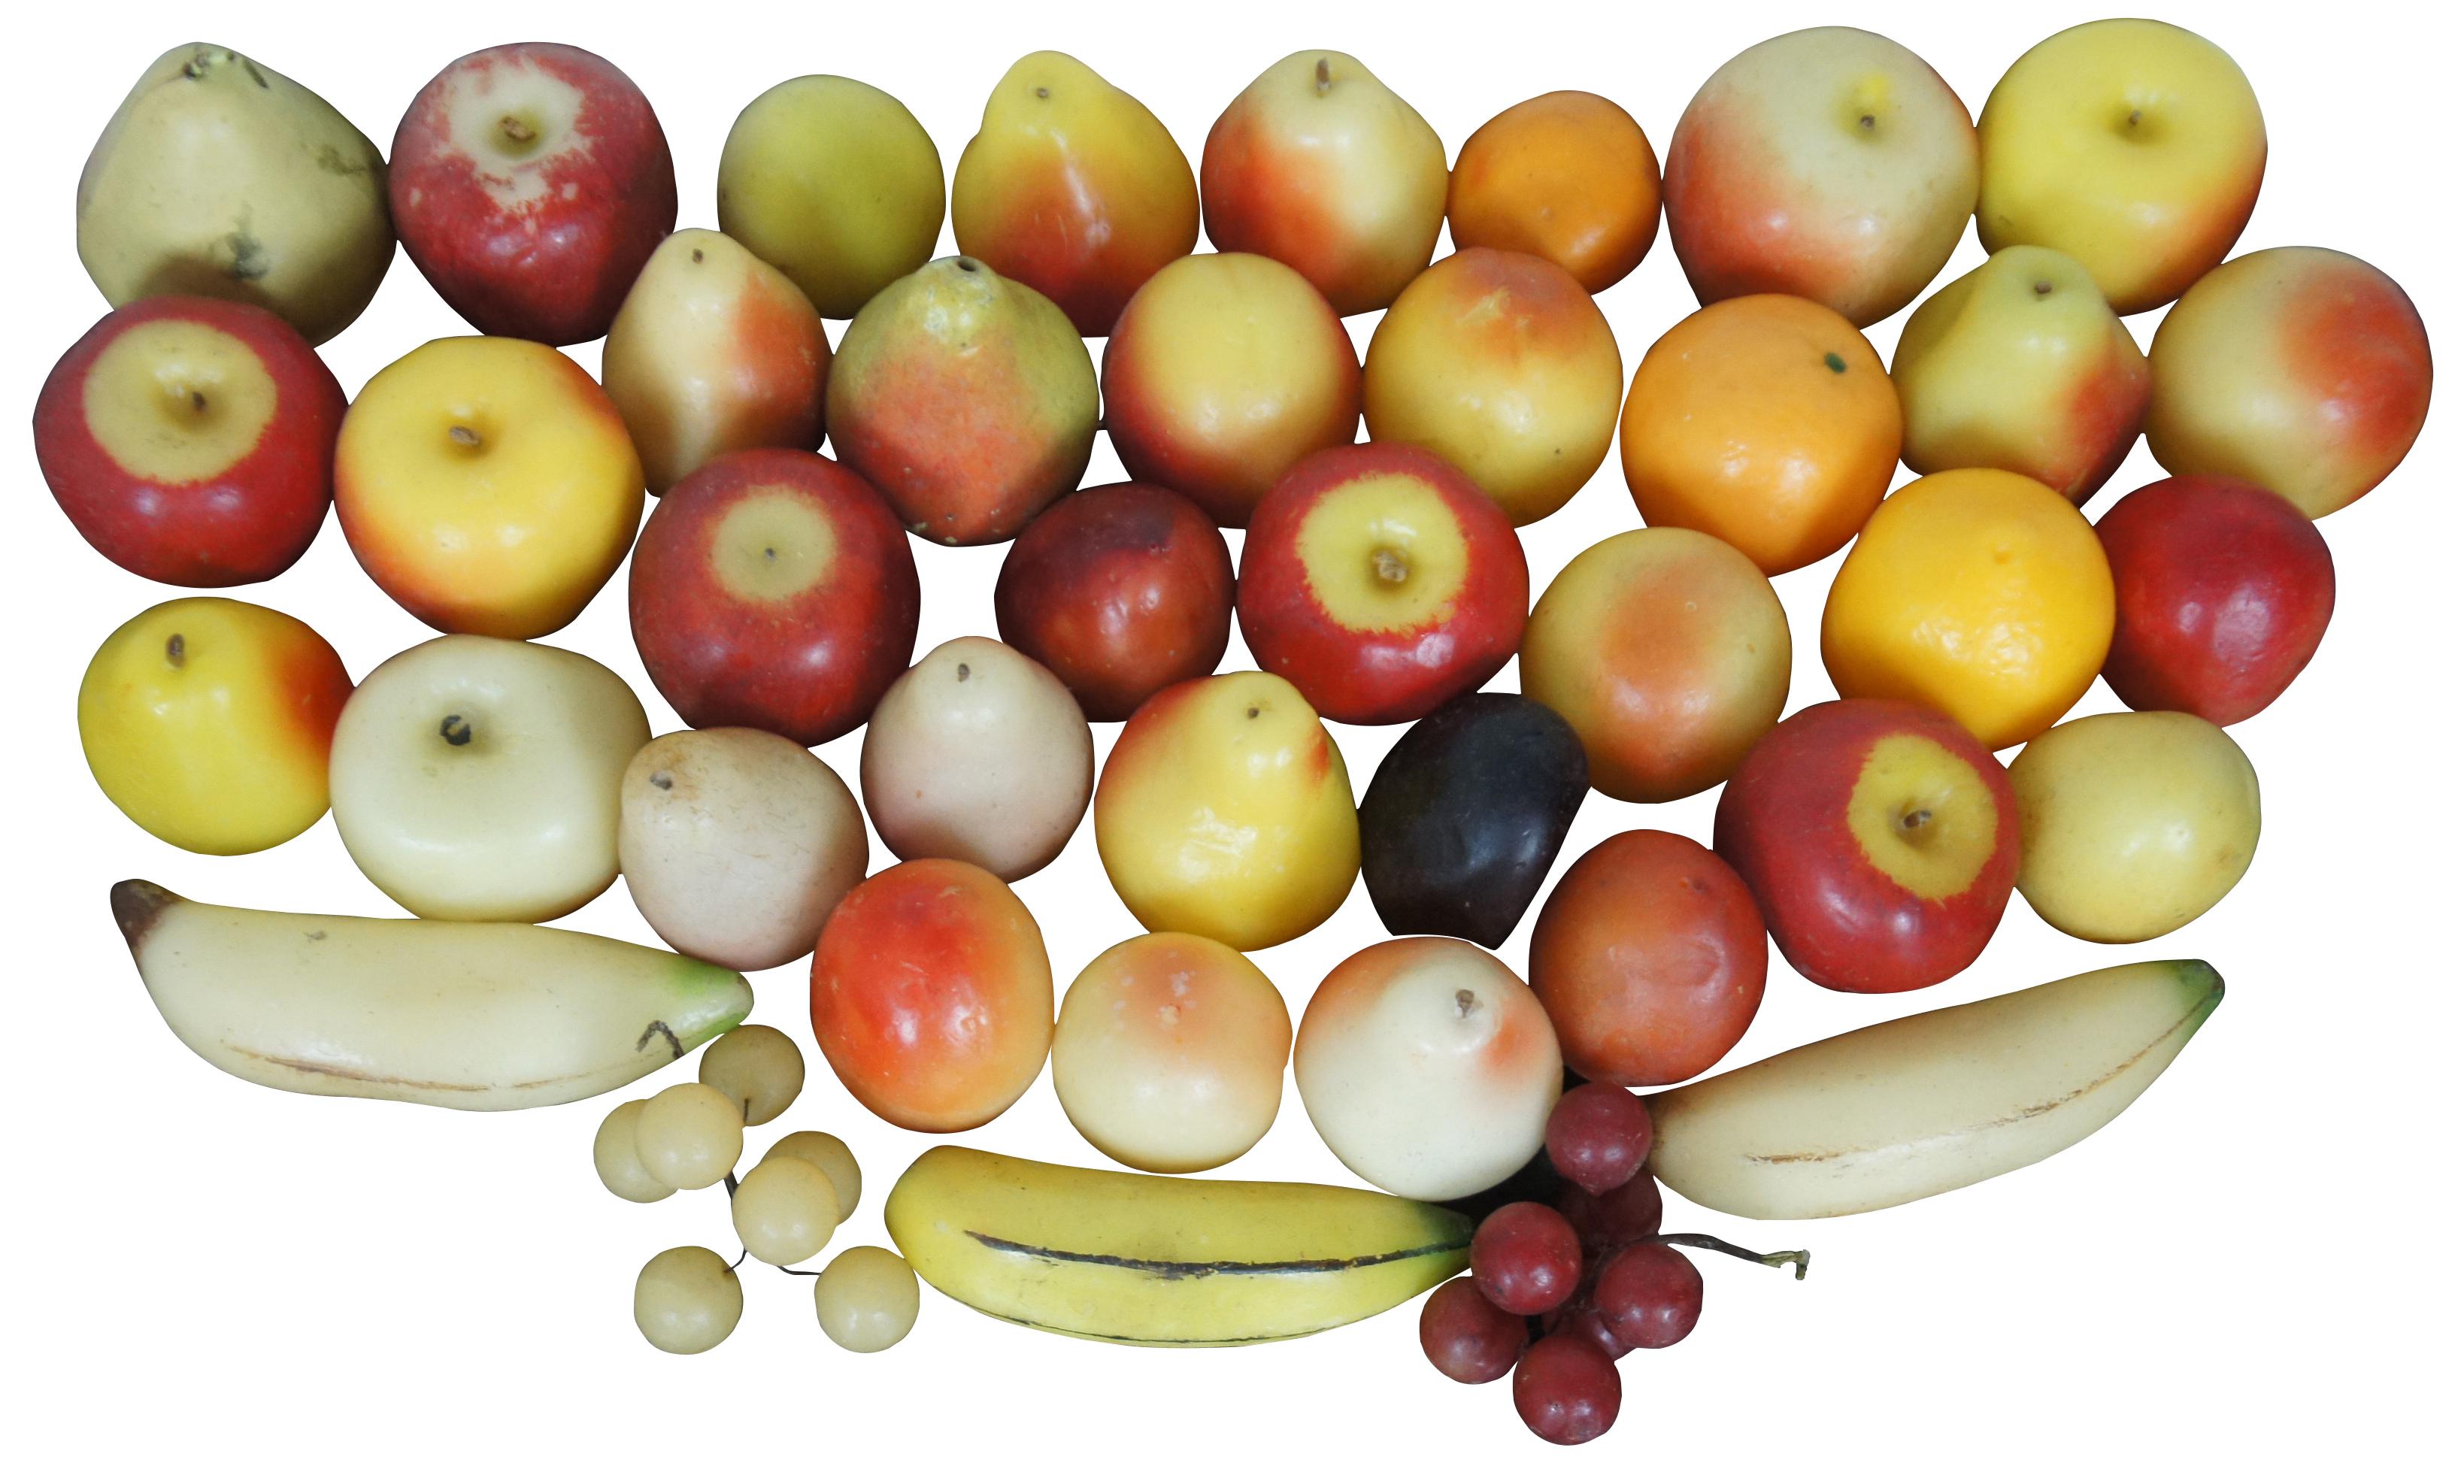 Lot of 40 pieces of wax fruit featuring apples, pears, peaches, oranges, bananas and grapes. One pear is plastic covered polystyrene.

Apple - 3.25” x 3.25” x 3” (Width x Depth x Height).